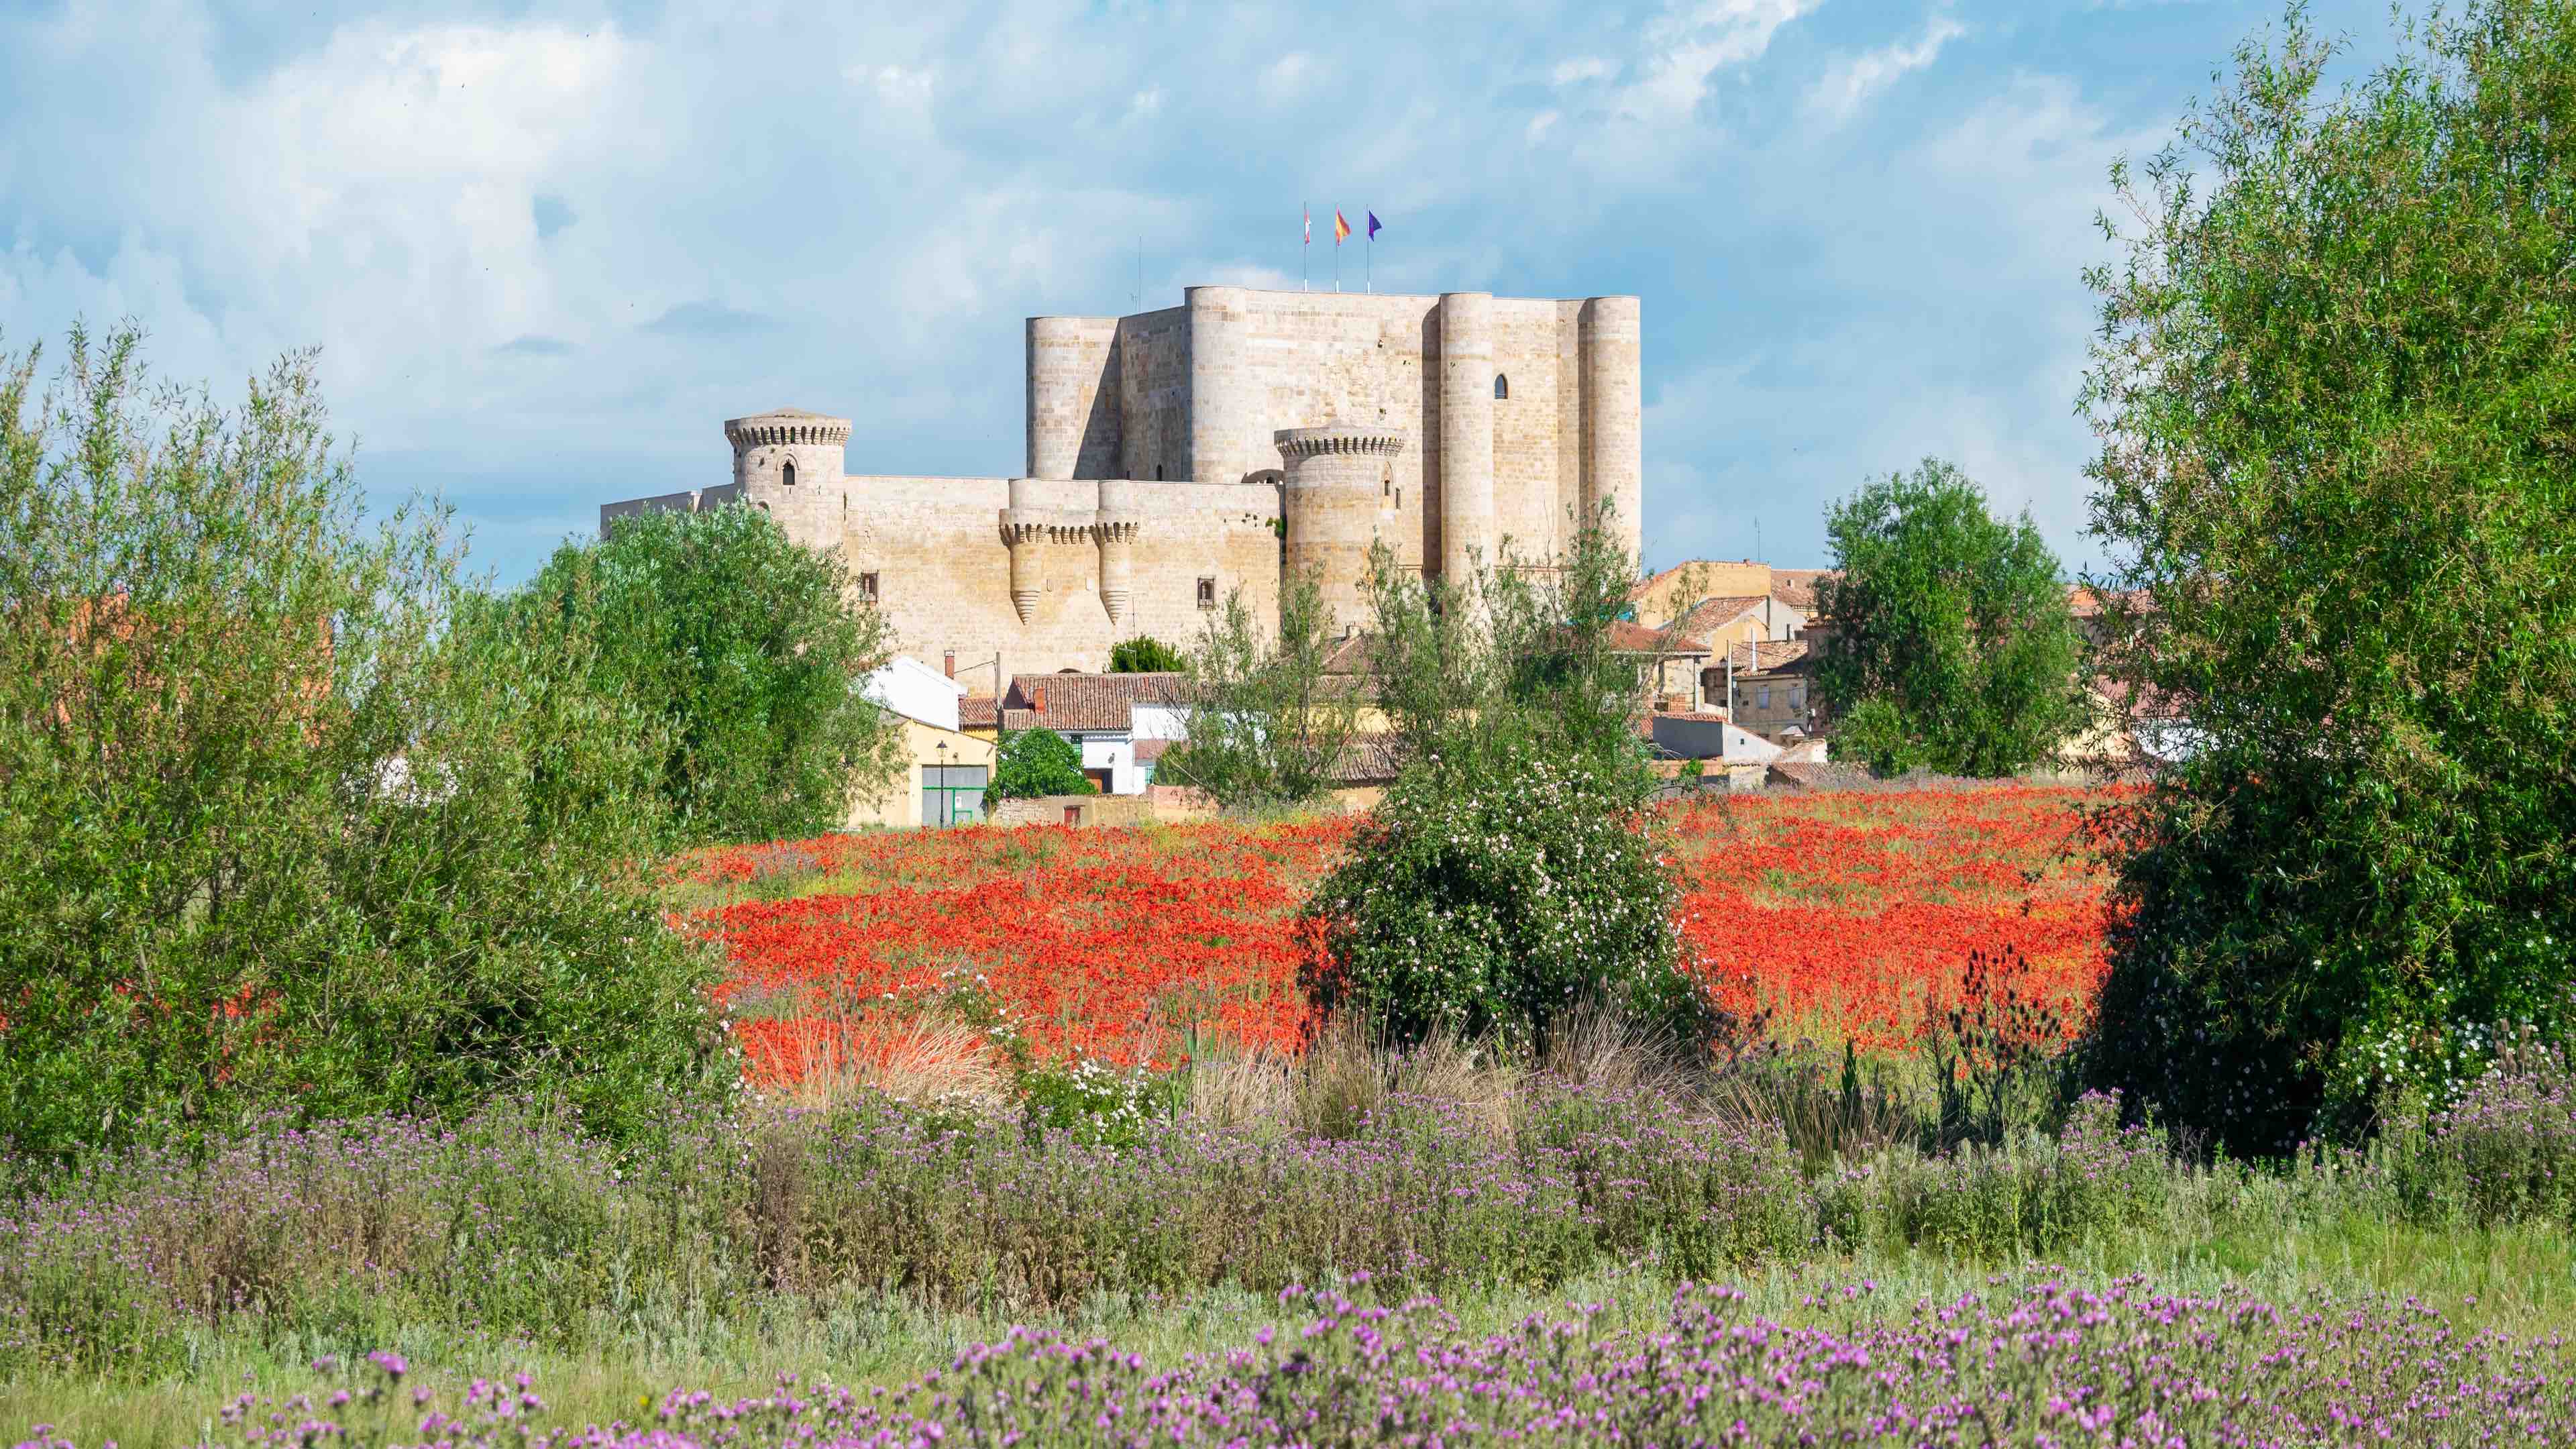 Meadow planted with red poppie flowers with the medieval castle of the fifteenth century in the town of Fuentes de Valdepero, Spain